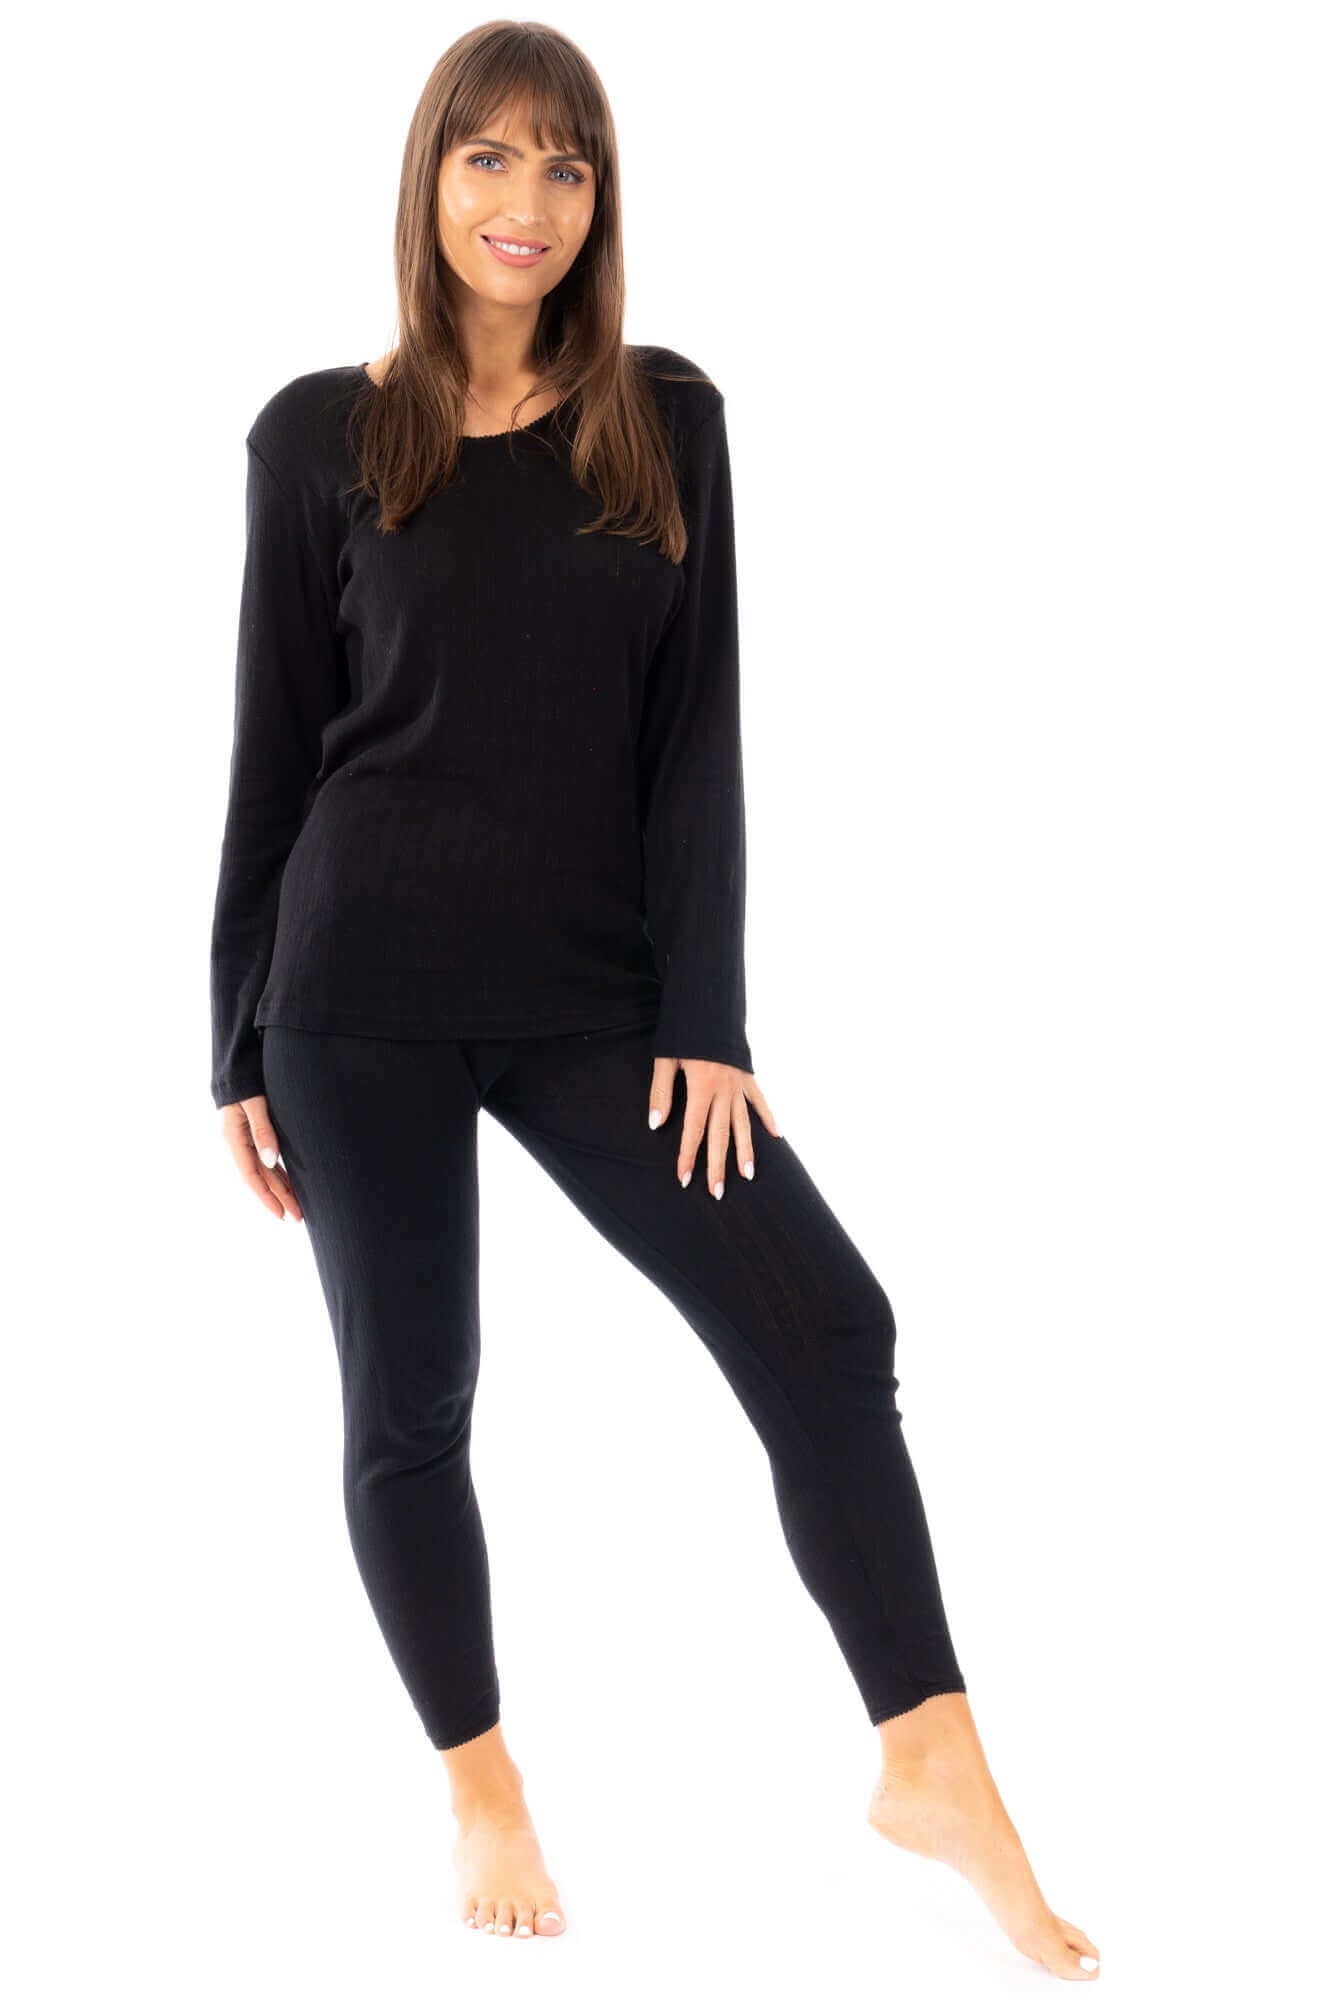 Heatwave® Women's Thermal Long Sleeve Top & Pants Sets, Warm Winter Baselayers. Buy now for £10.00. A Thermal Underwear by Daisy Dreamer. 10-12, 14-16, 16-18, 18-20, 20-22, 22-24, 8-10, baselayer, black, bridesmaid, daisy dreamer, grey, gym, heatwave, hik